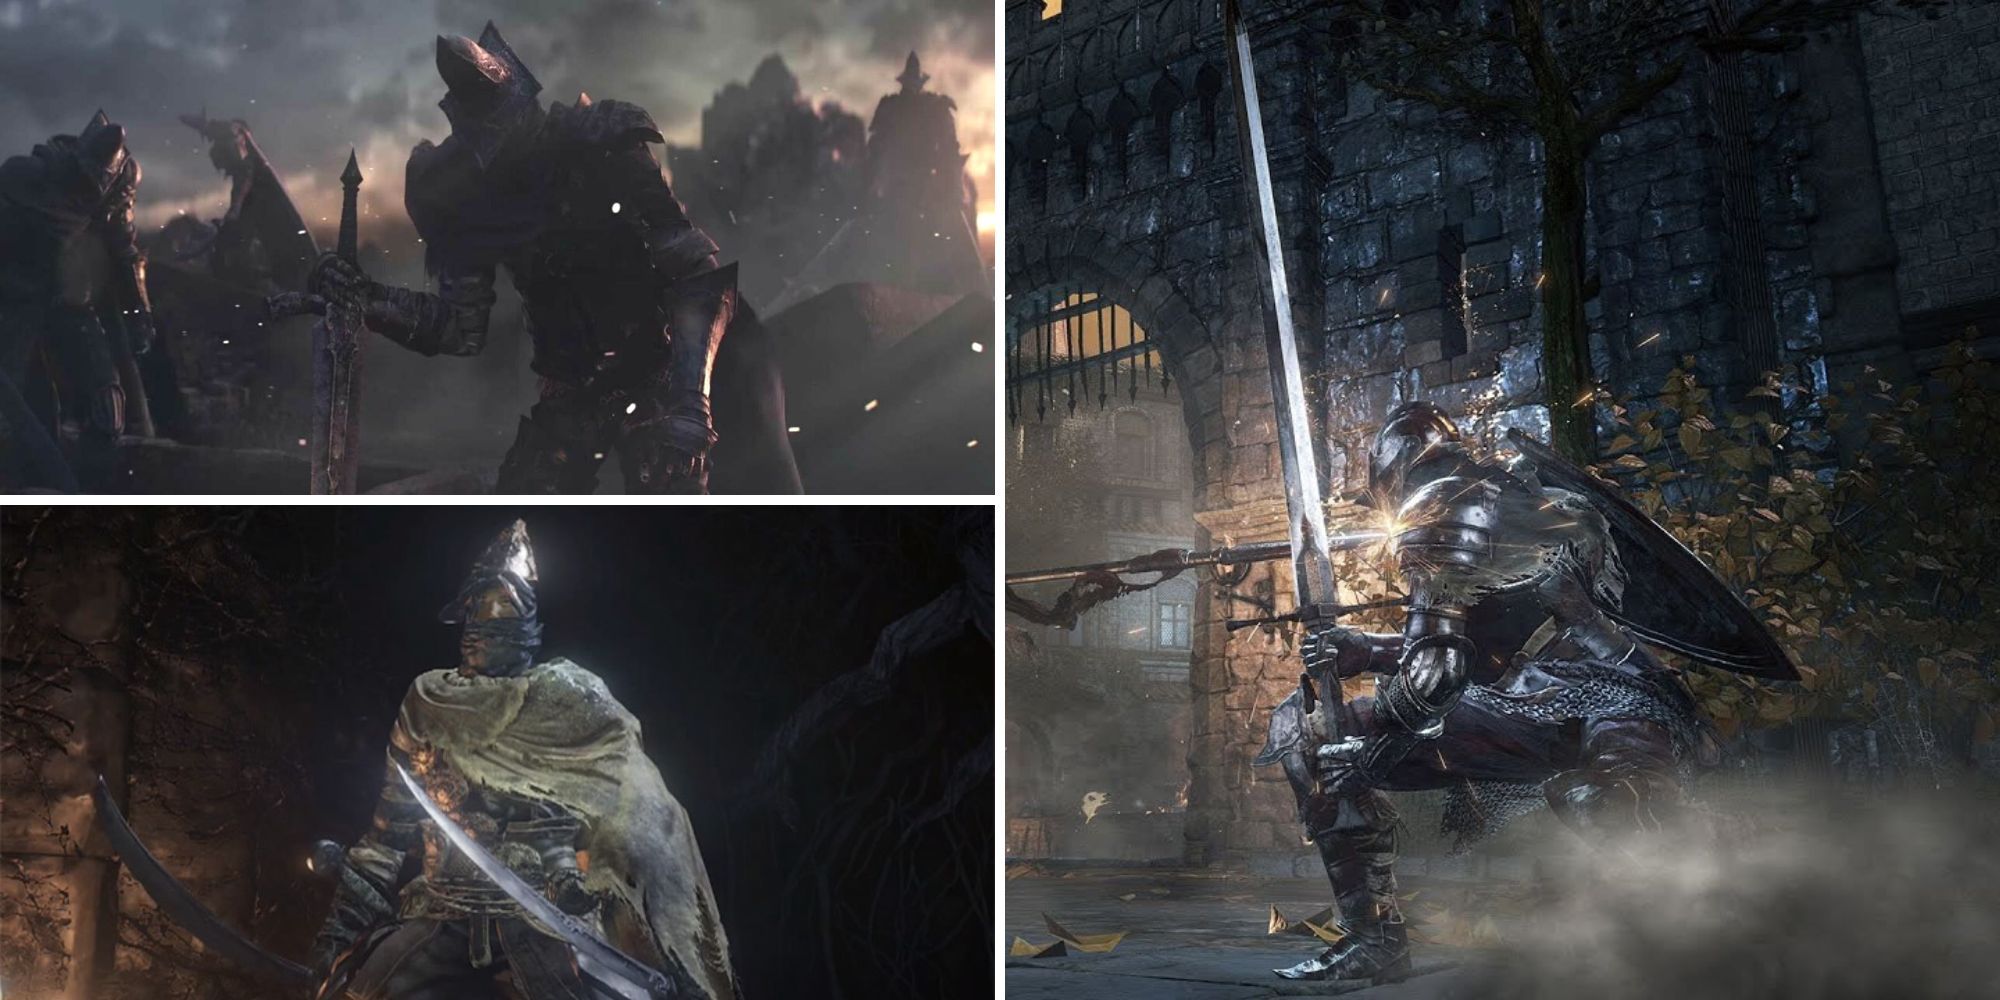 Dark Souls 3 Weapons Tier List [All Weapons Ranked]